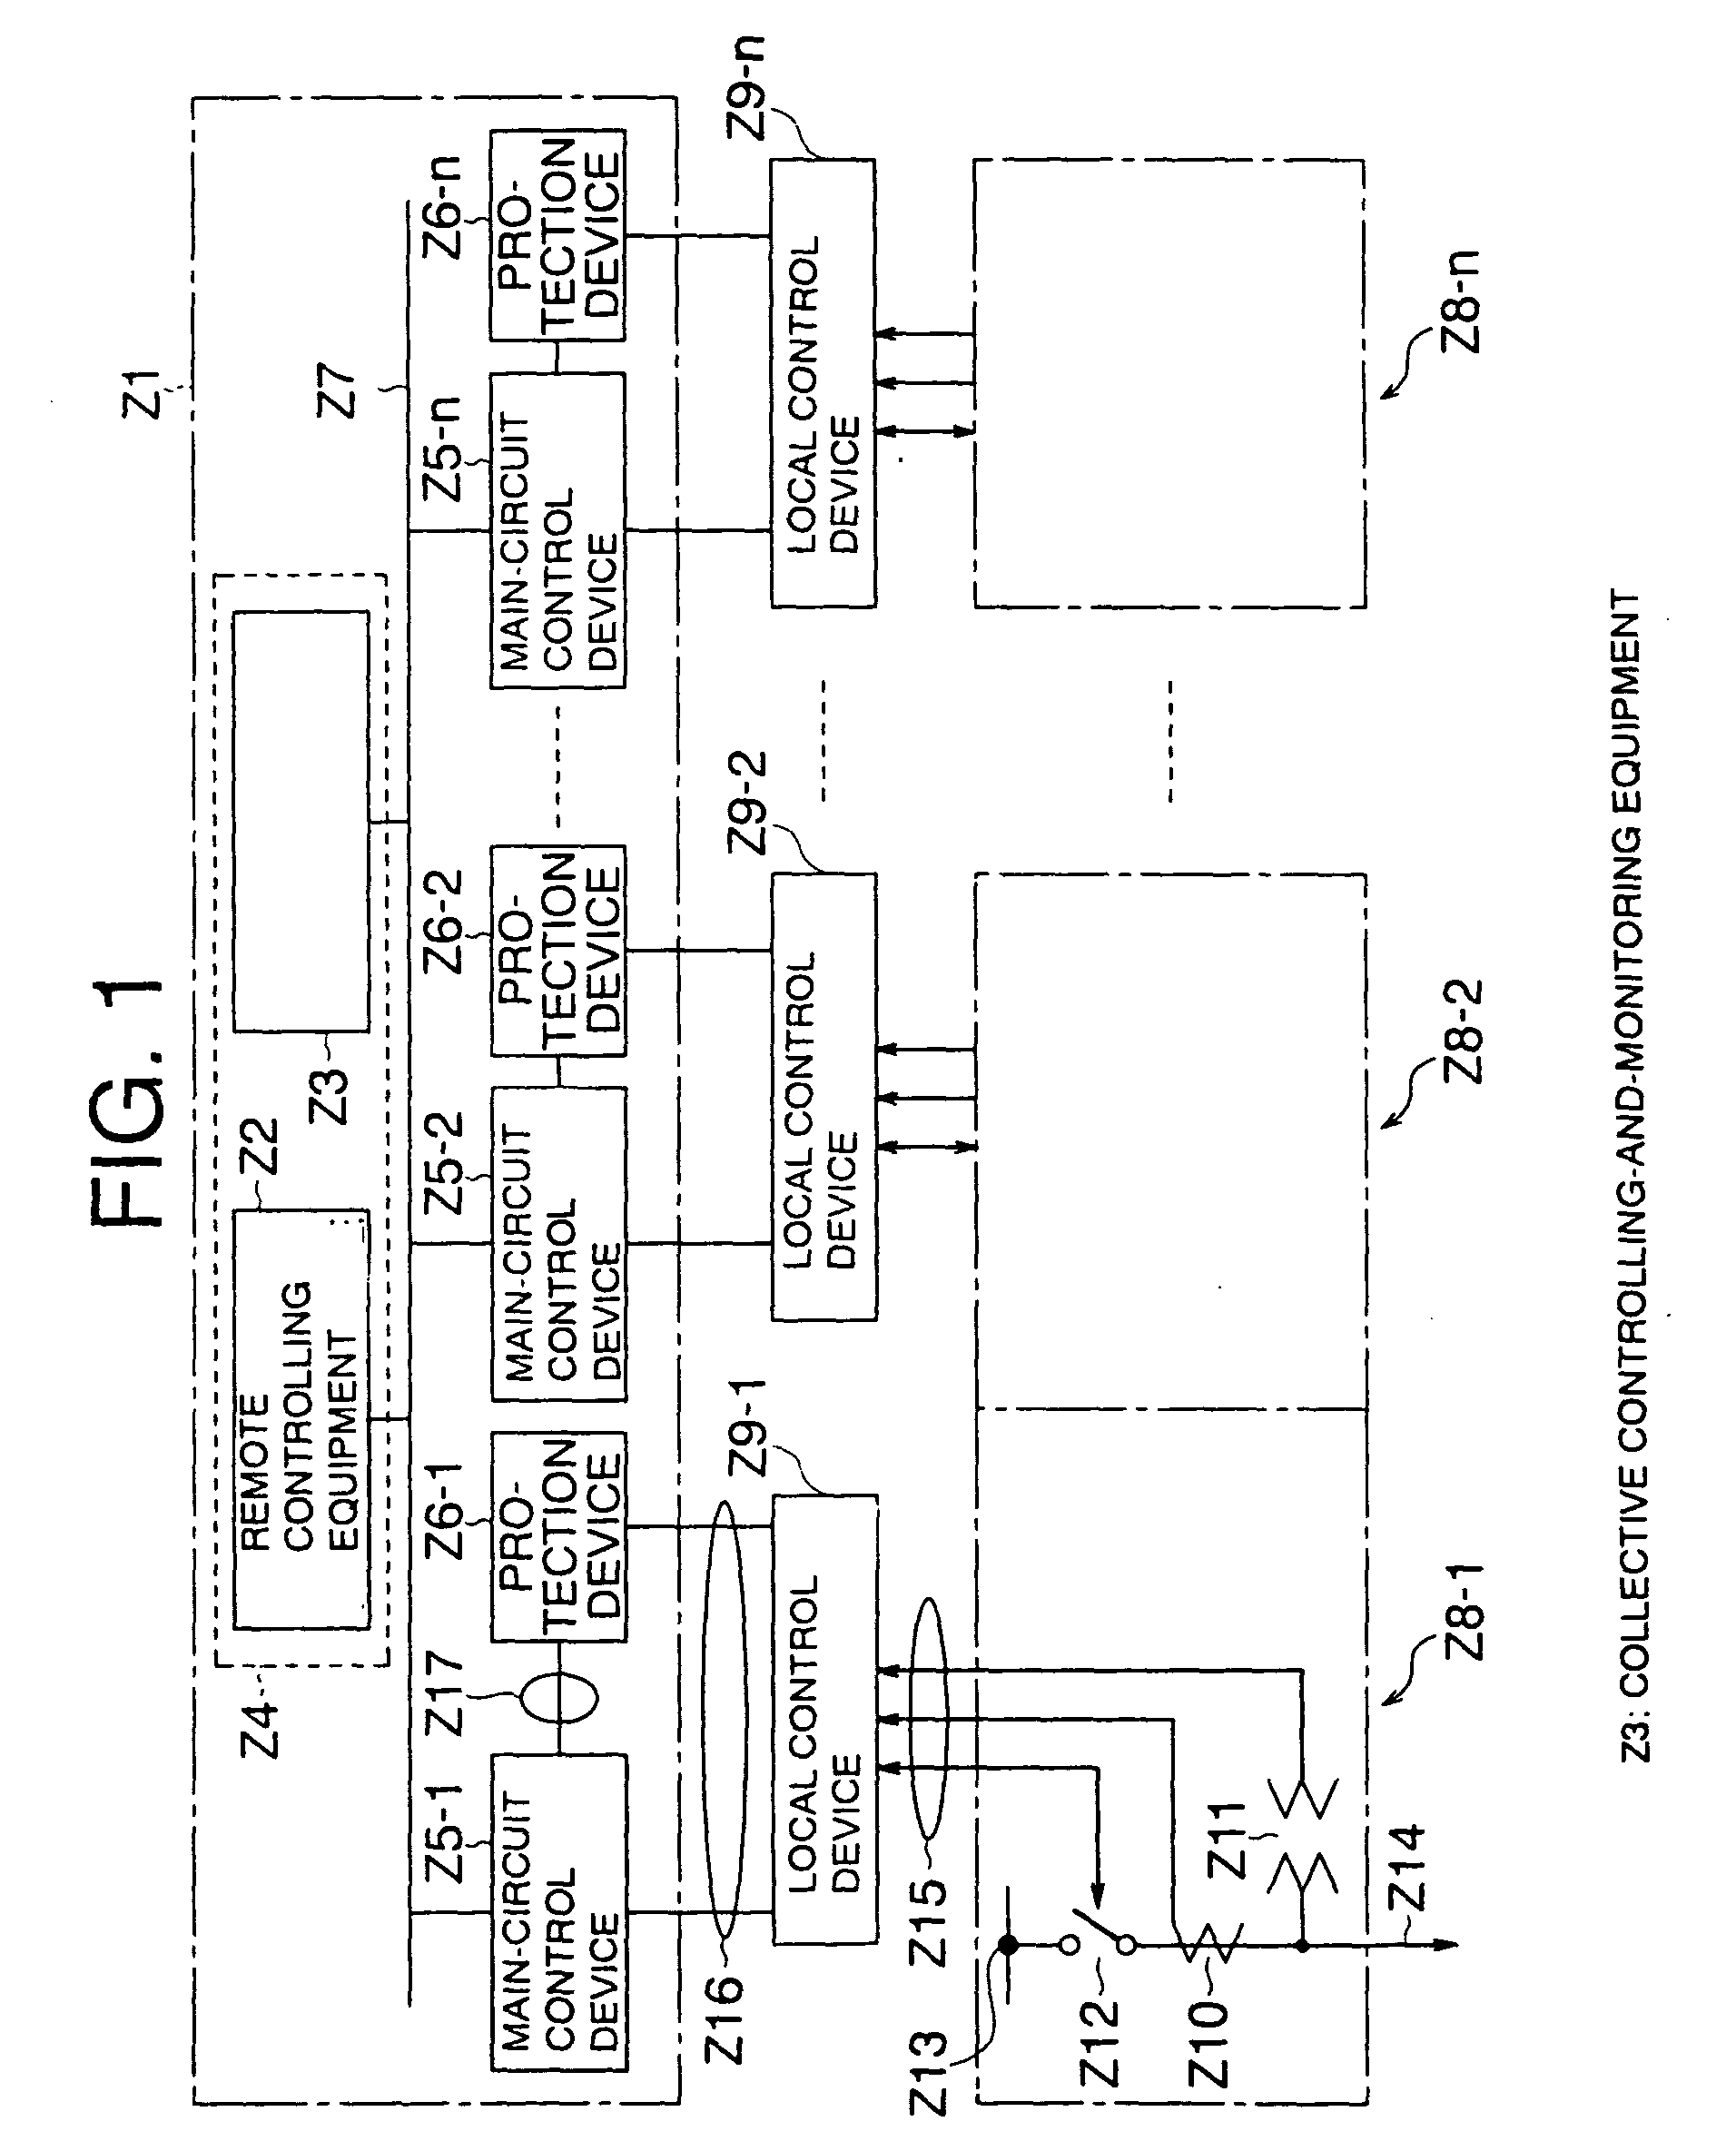 Digital protection and control device